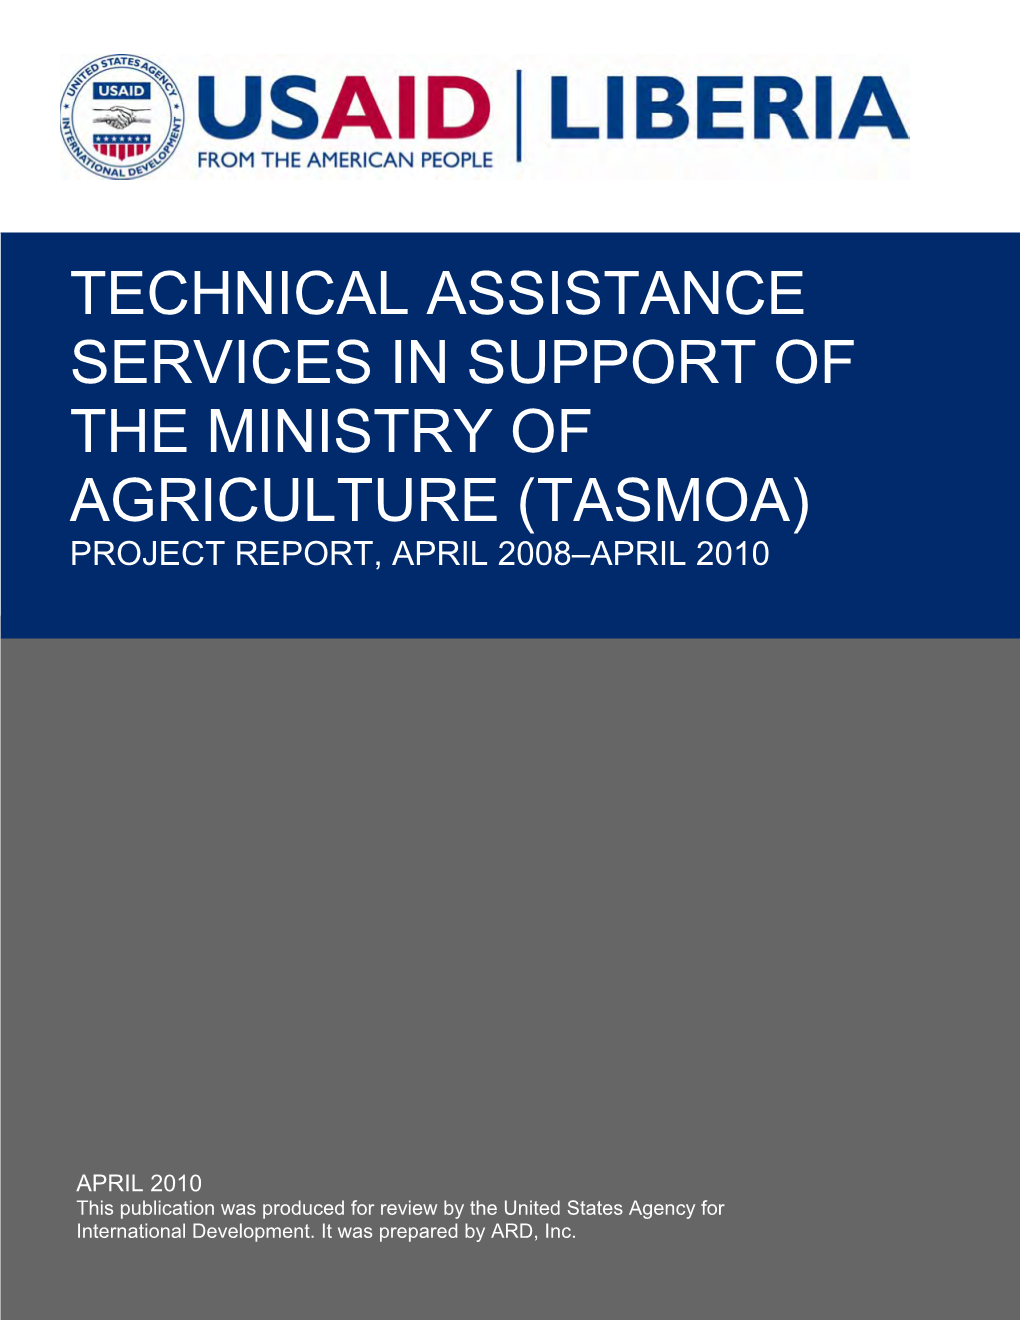 Technical Assistance Services in Support of the Ministry of Agriculture (Tasmoa) Project Report, April 2008–April 2010